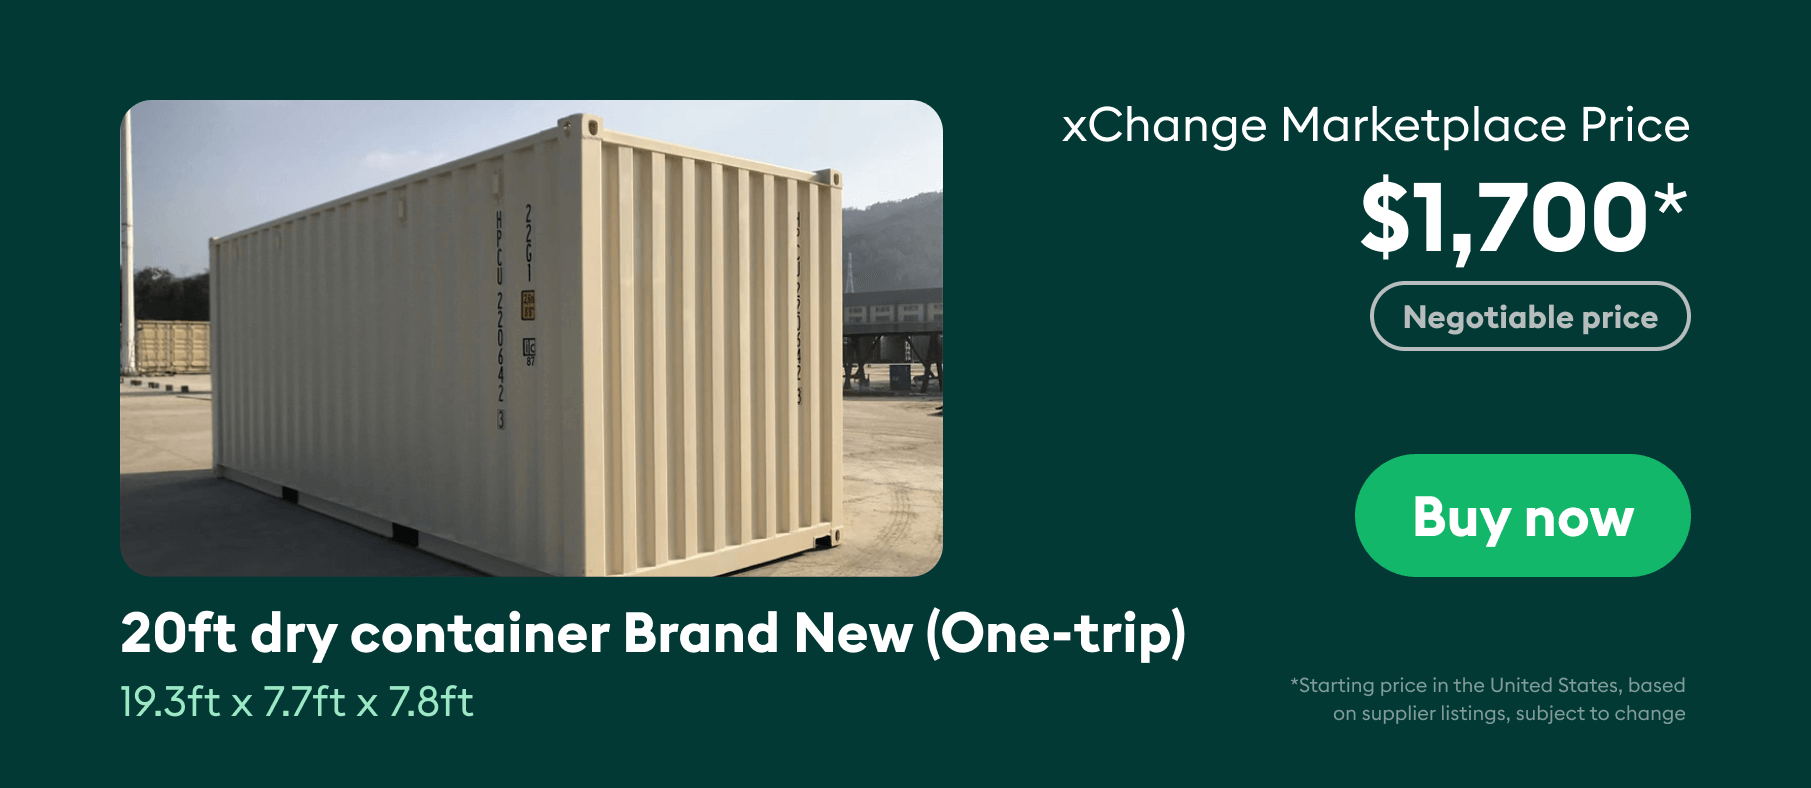 20ft brand new container costs around $1,700 on the xChange Marketplace.